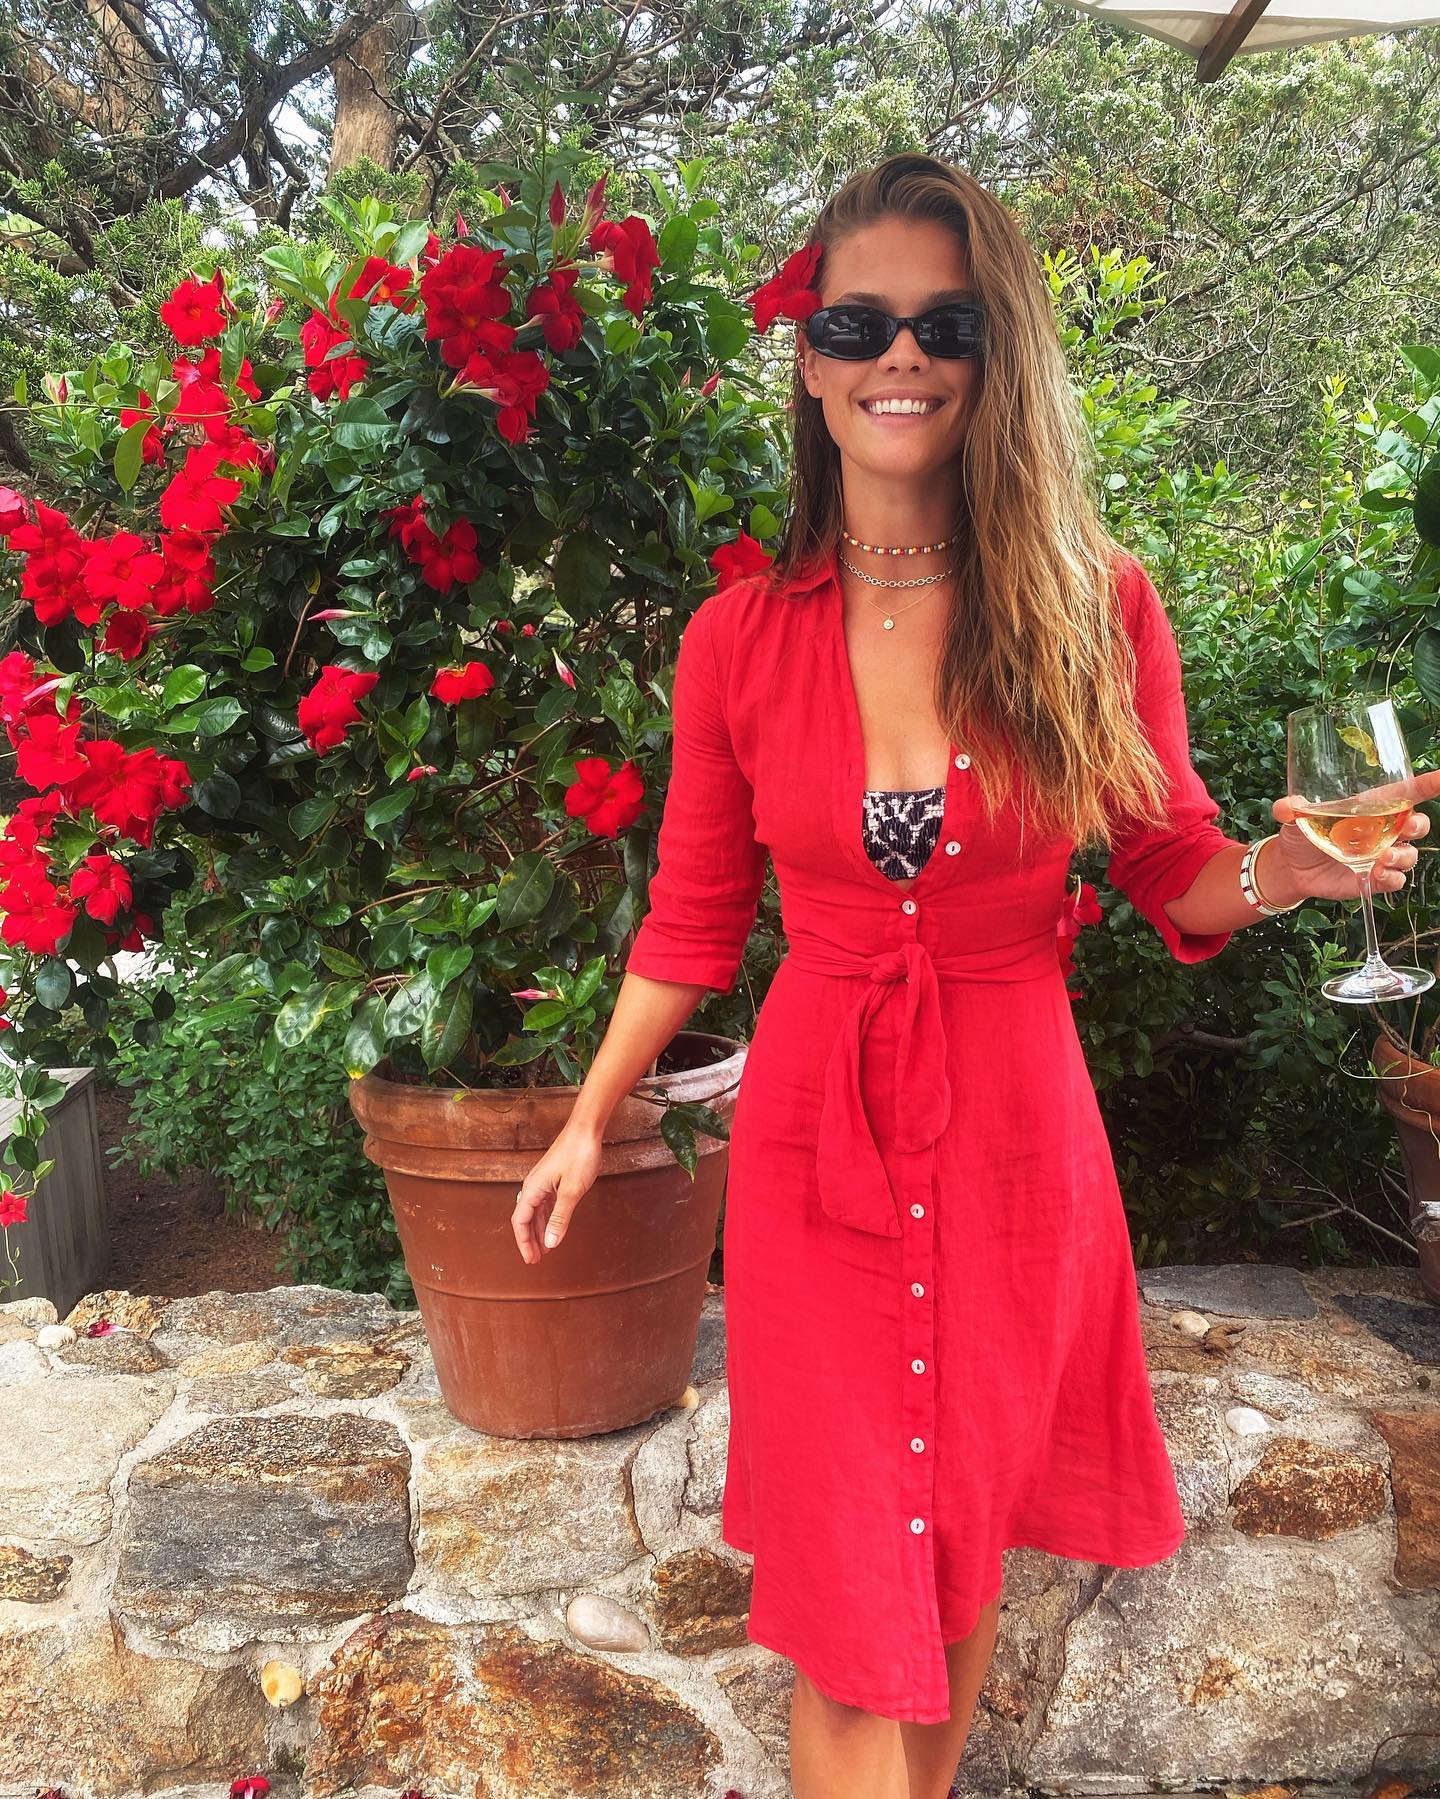 Nina Agdal is The Lady in Red!